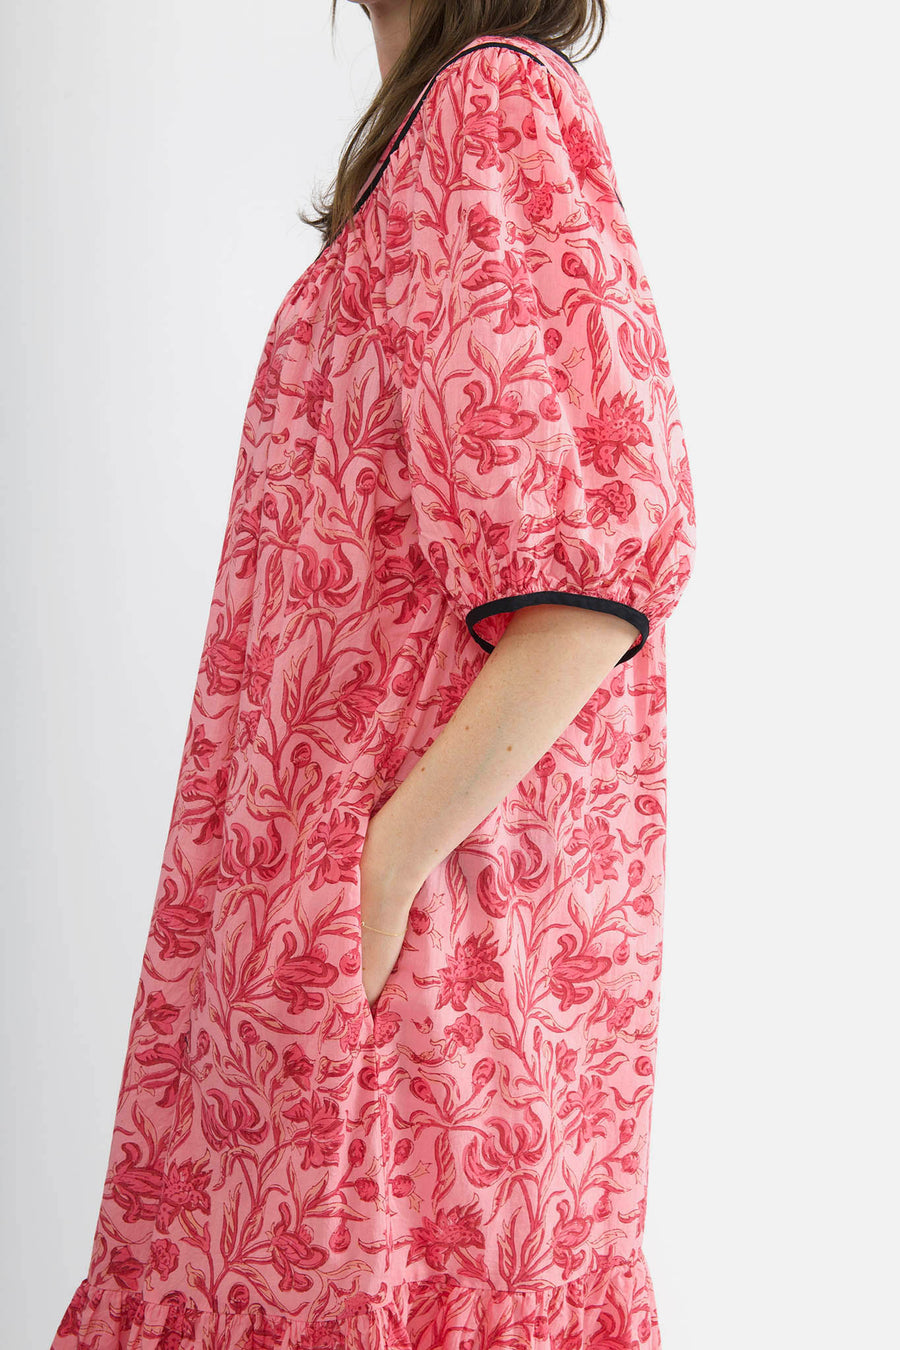 Snap Housedress in Pink Floral Block Print